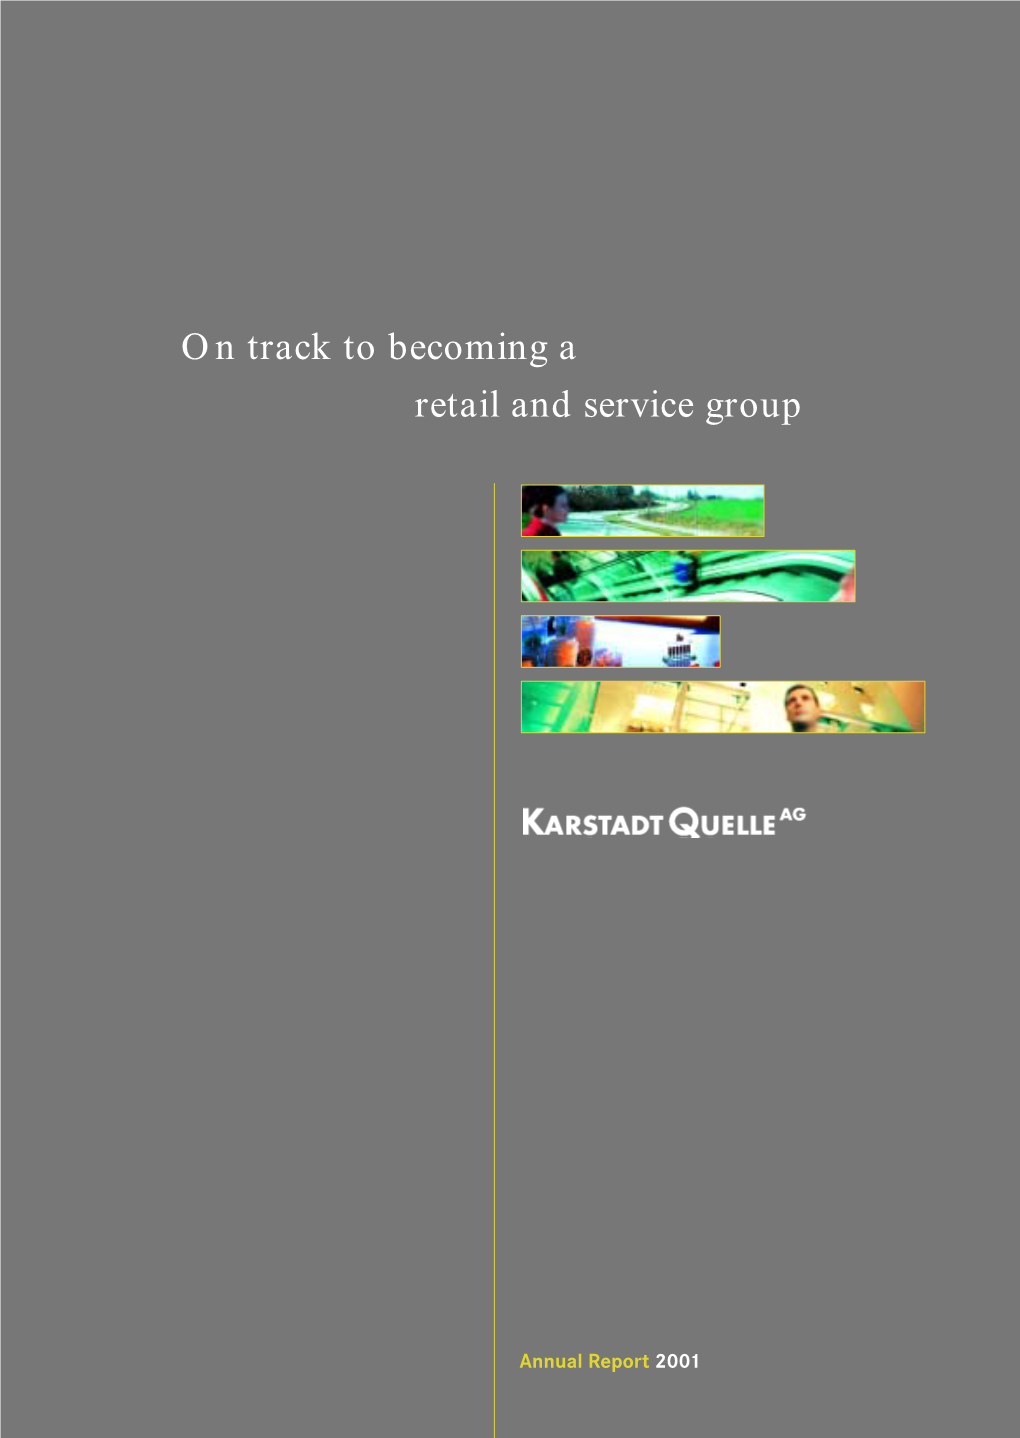 On Track to Becoming a Retail and Service Group